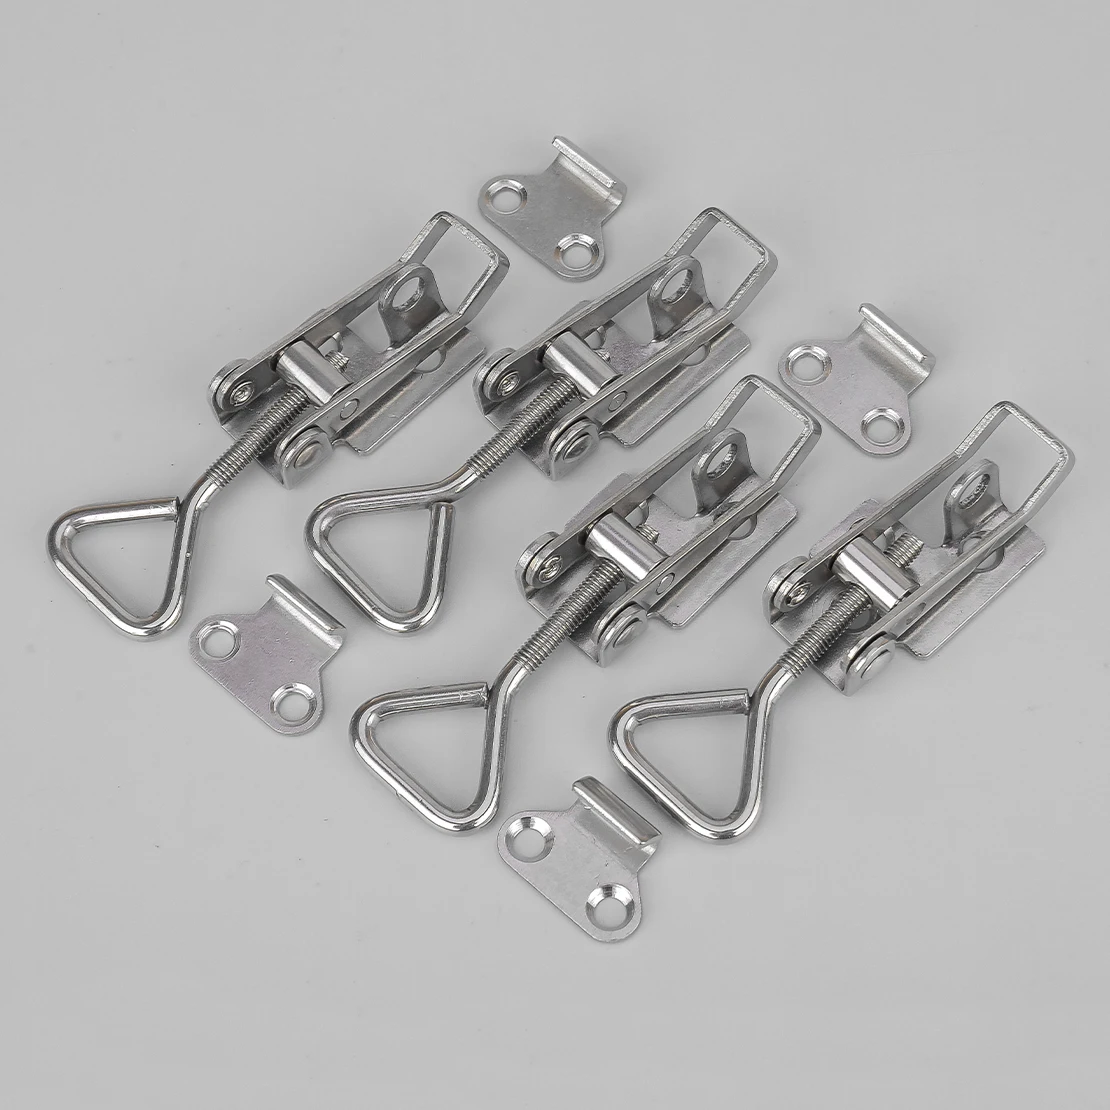 

4 Sets Stainless Steel Small Marine Toggle Latch Buckles with Keyhole Fastener Clamps for Boat Yacht RV Deck and Cabin Hardware